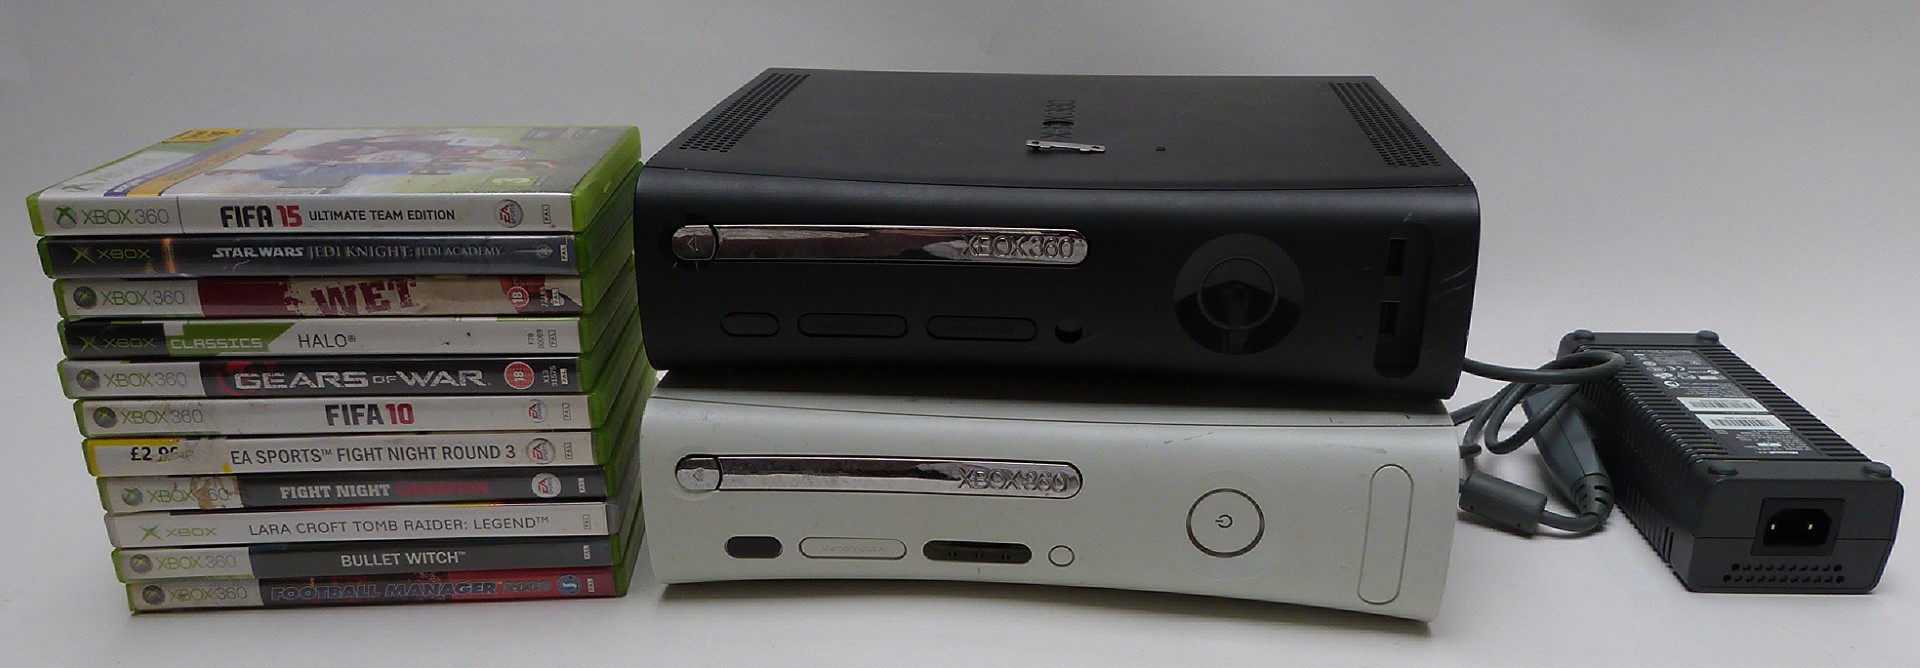 Two Xbox 360 video games consoles together with 11 various games.